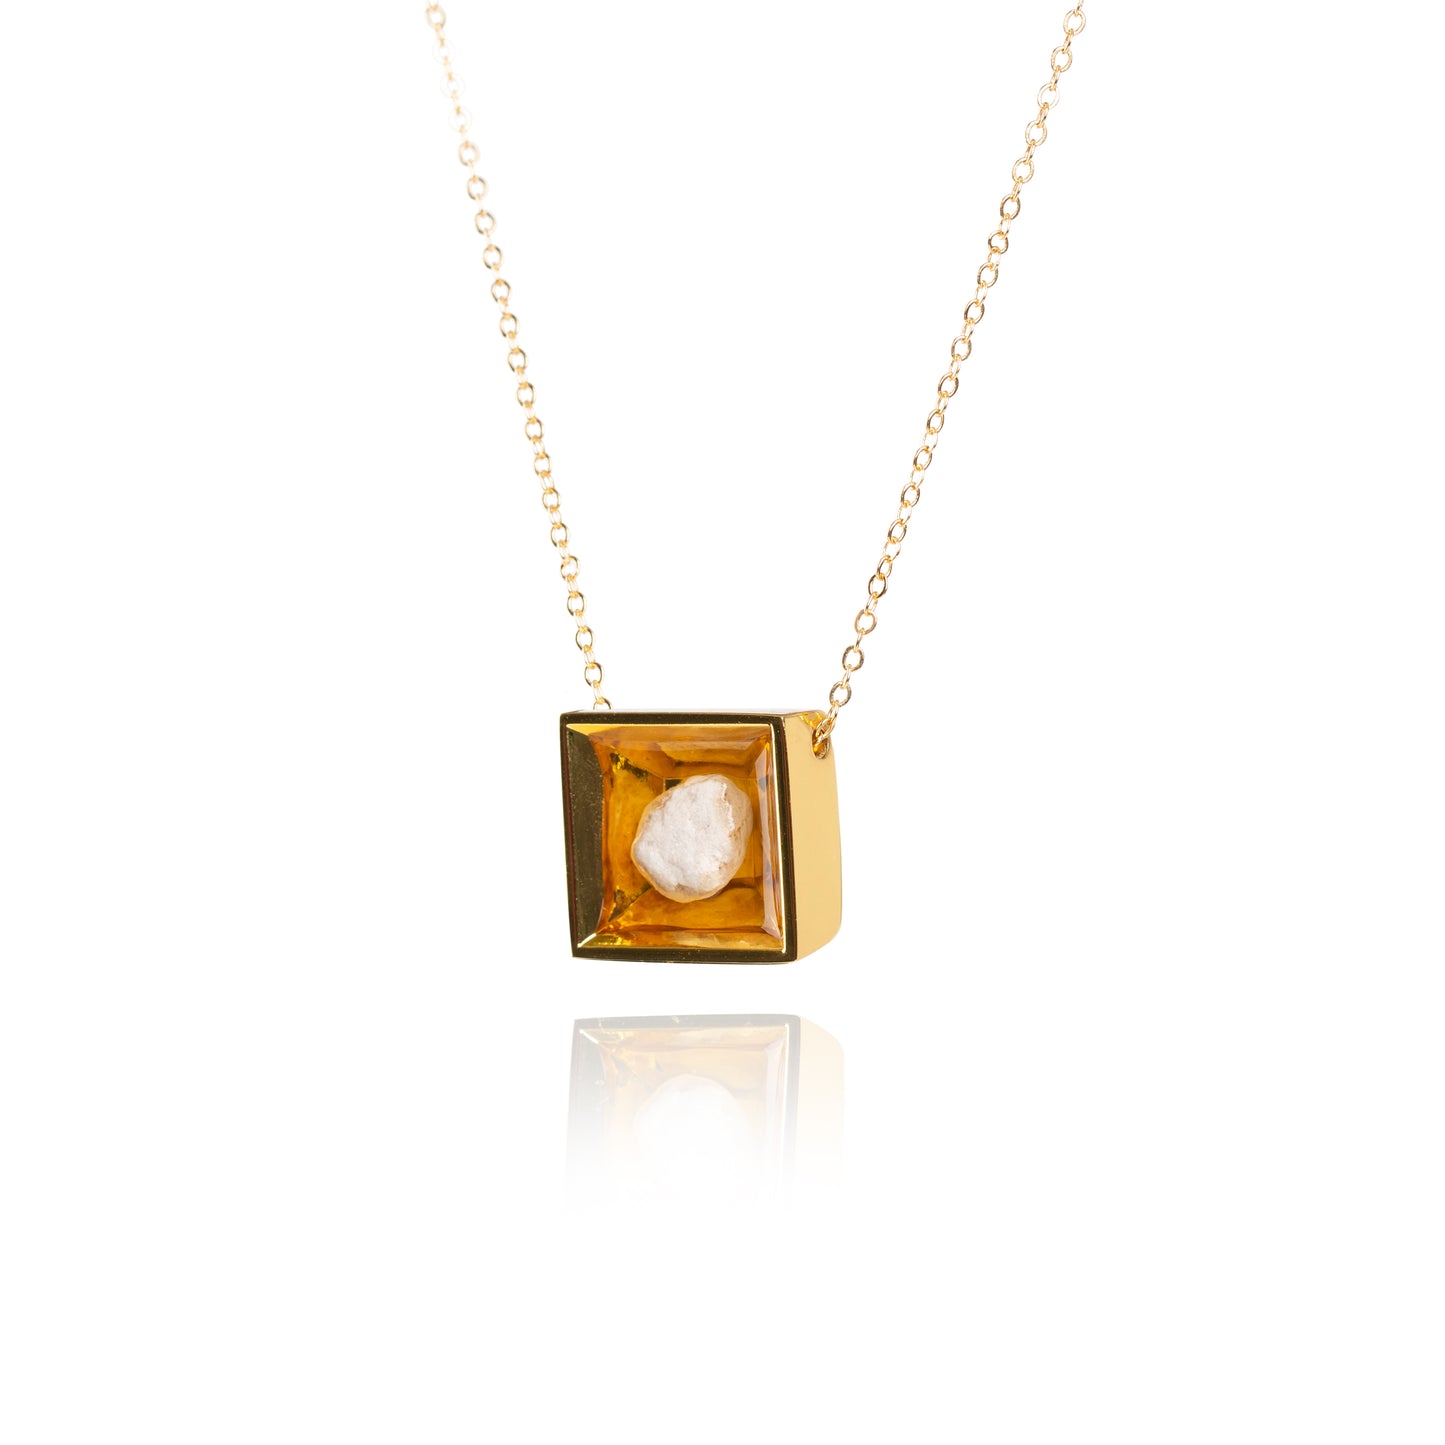 A side view of a small natural tan stone sitting in the middle of a square shaped metal pendant in a gold color. The pendant is hanging on a gold chain.